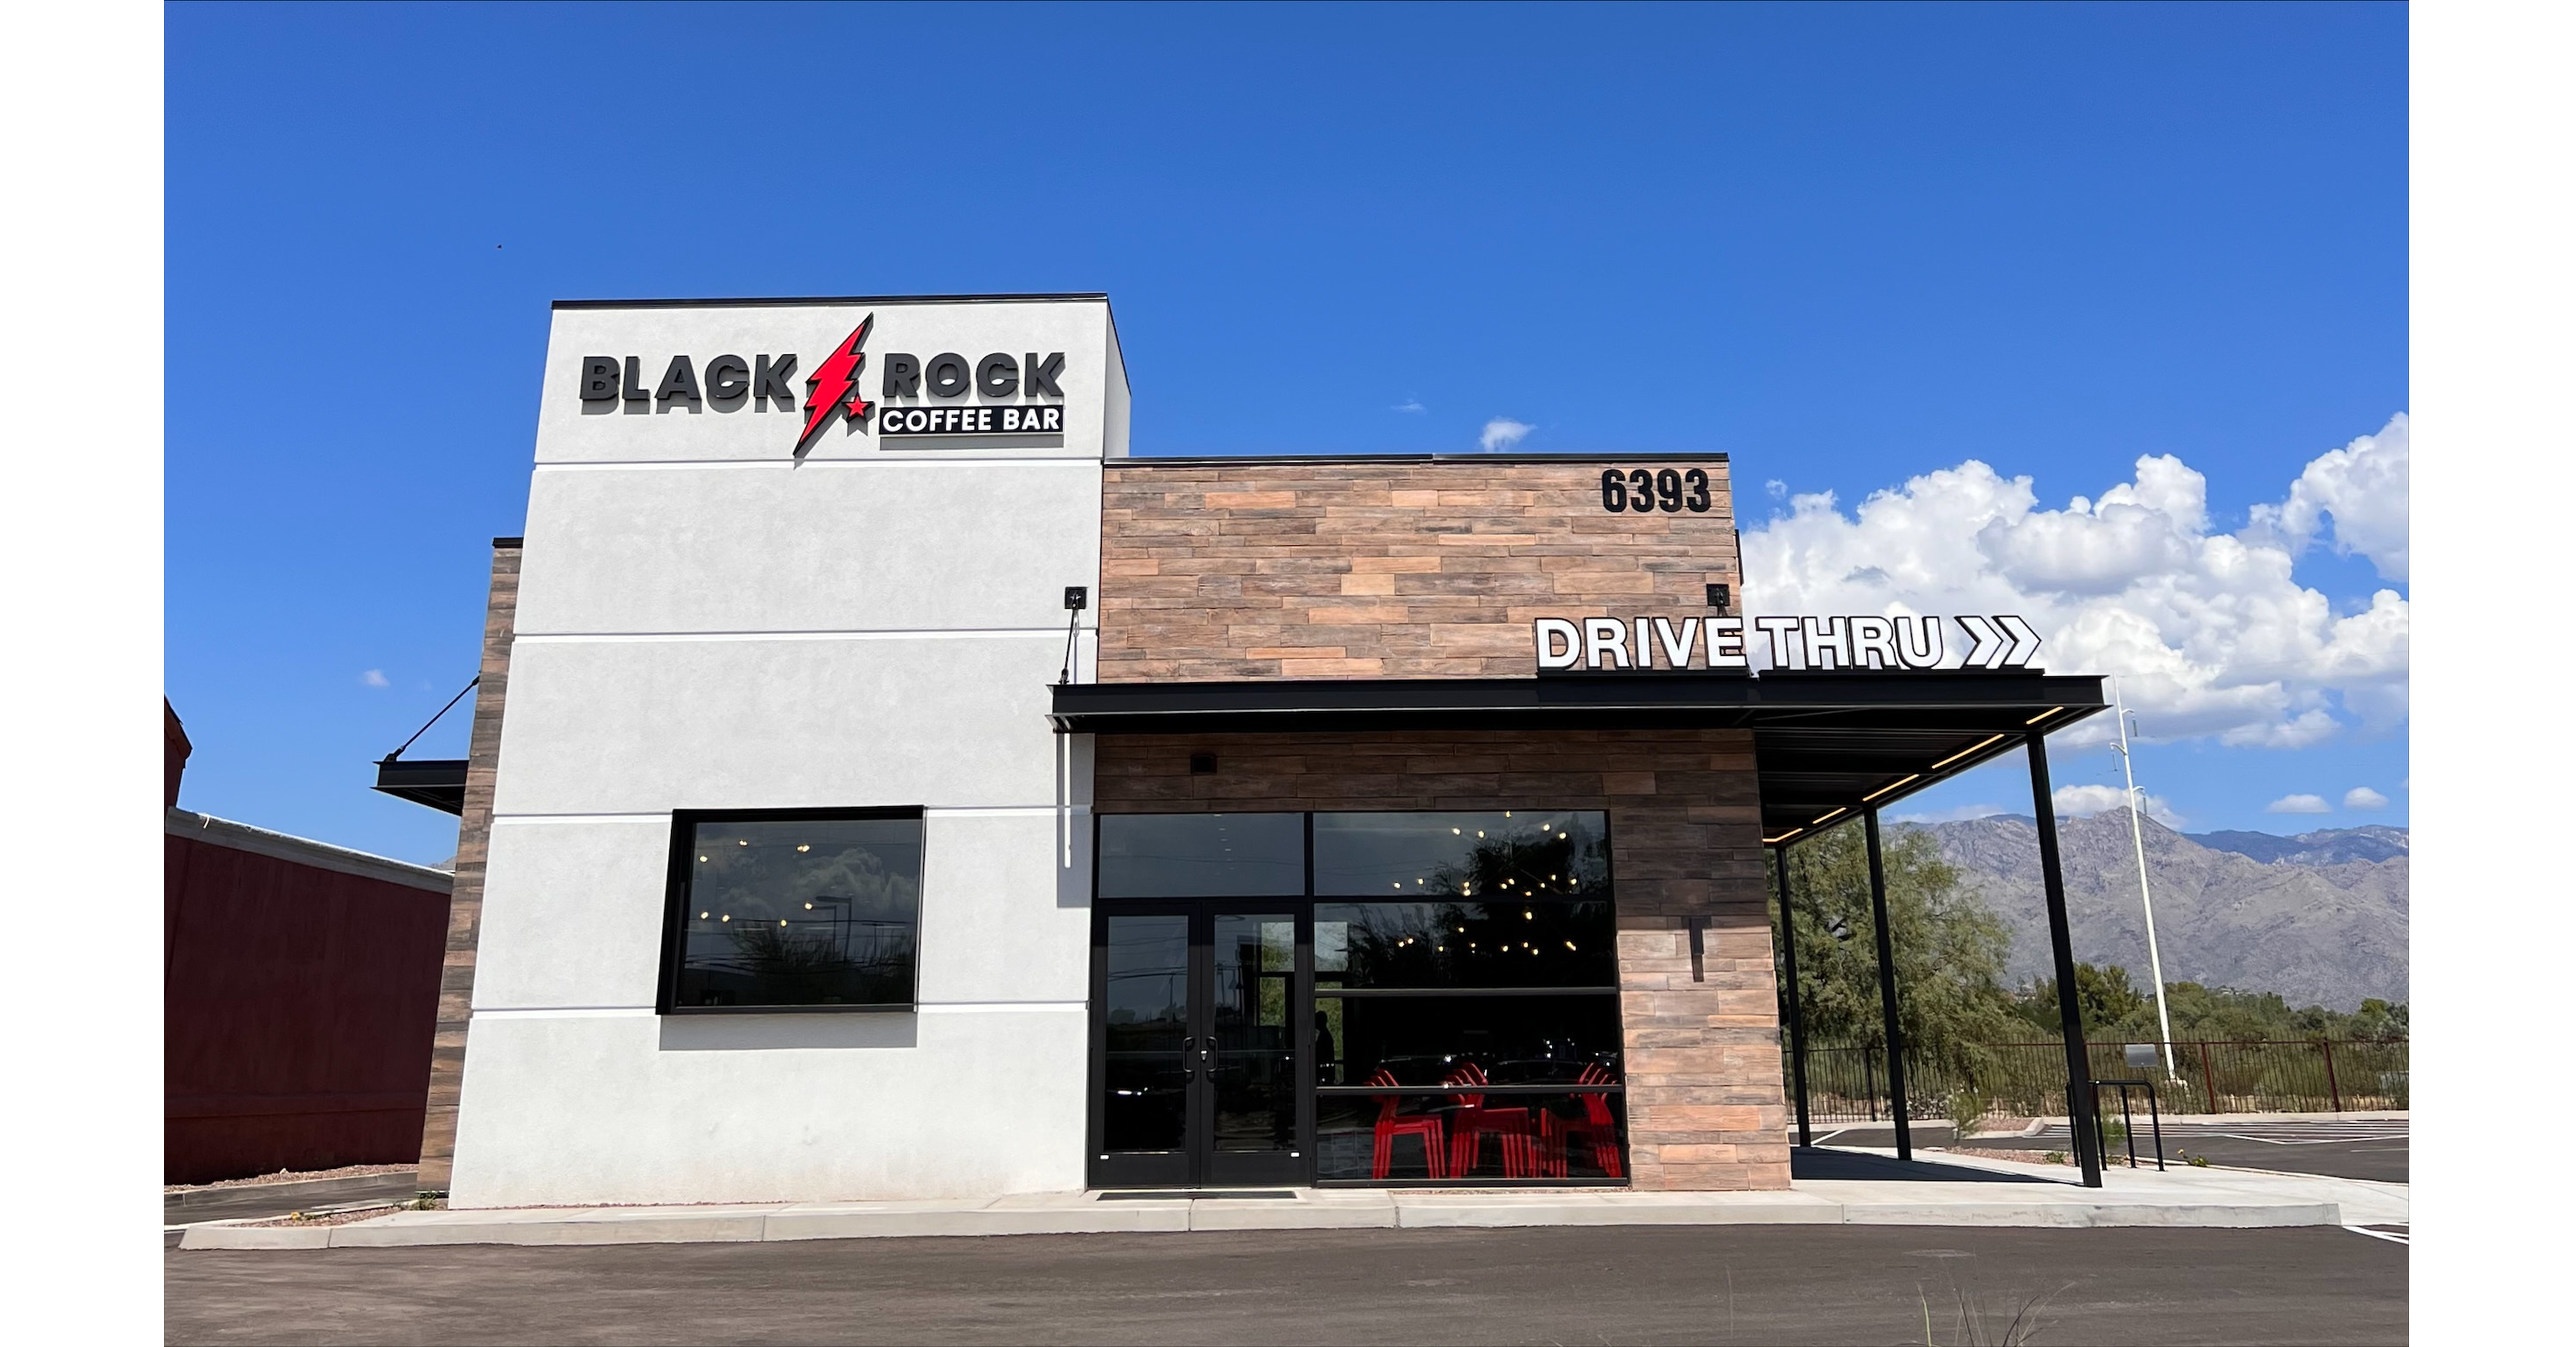 Black Rock Coffee Bar is Set to Open its Fourth Store in Tucson